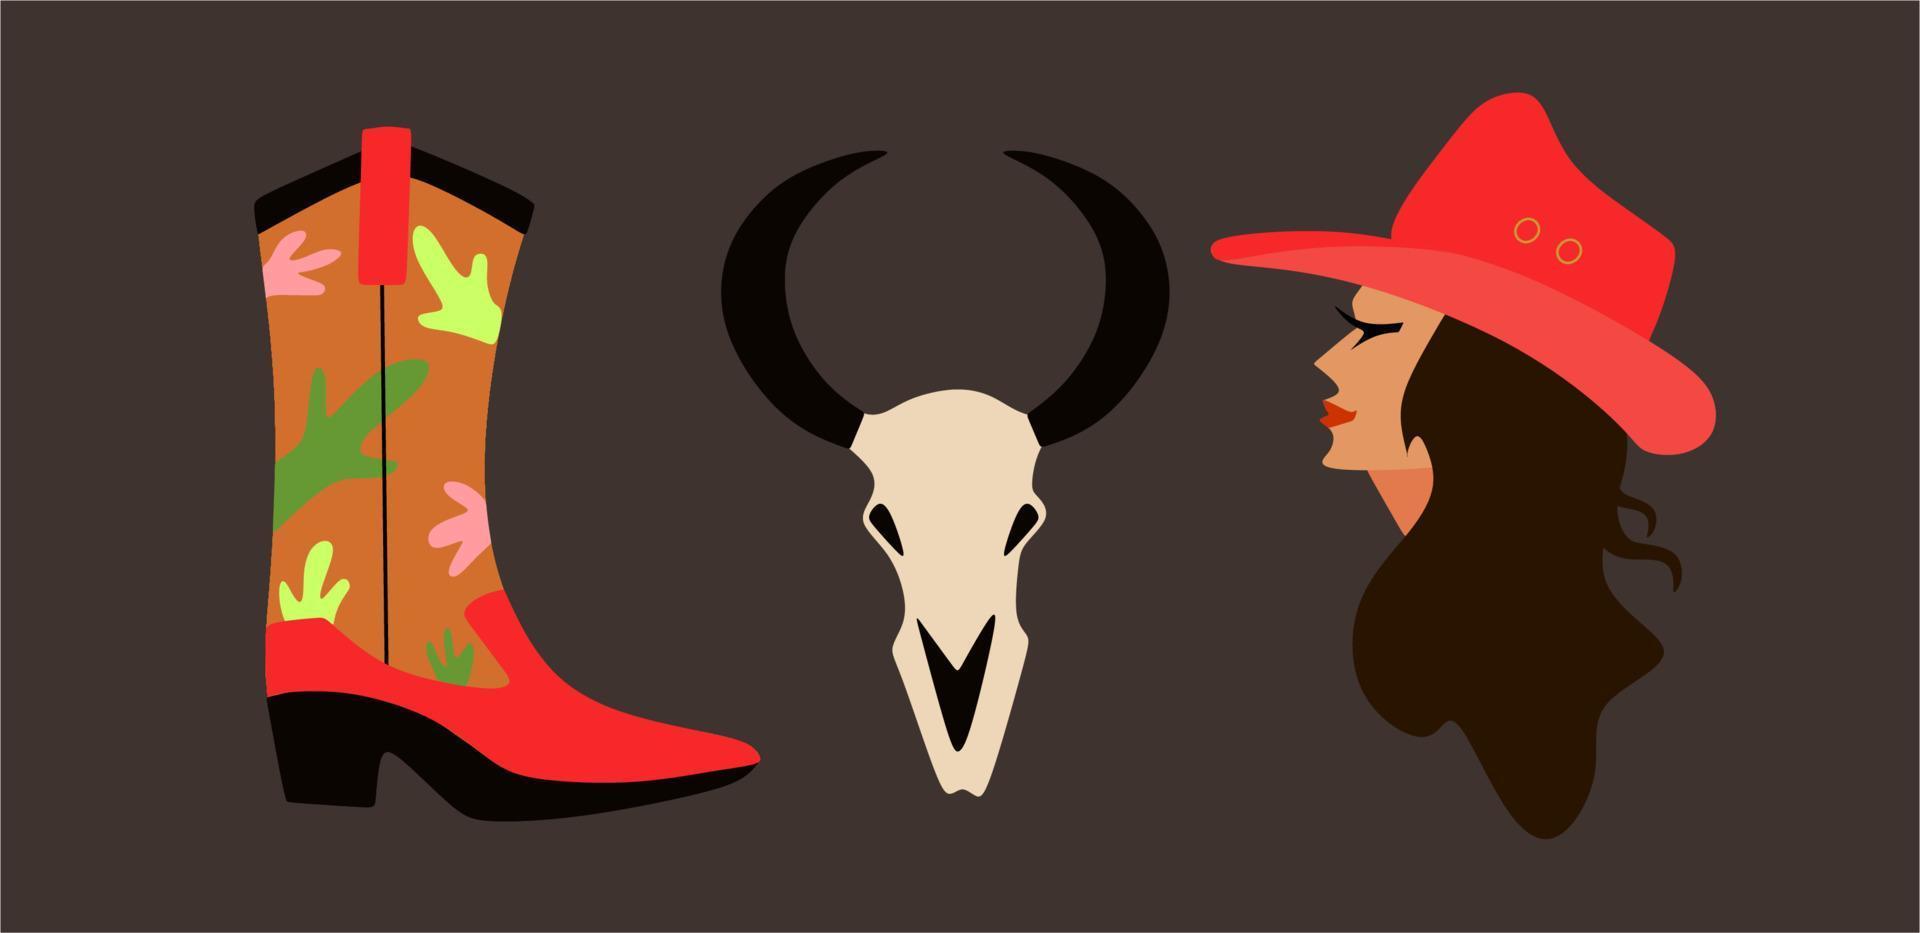 A set of drawings on the theme of the wild west. A cowboy girl, three types of cacti, a bull skull, a snake, cowboy boots and a hat. Retro illustration - set of elements. Cowboy mood. vector